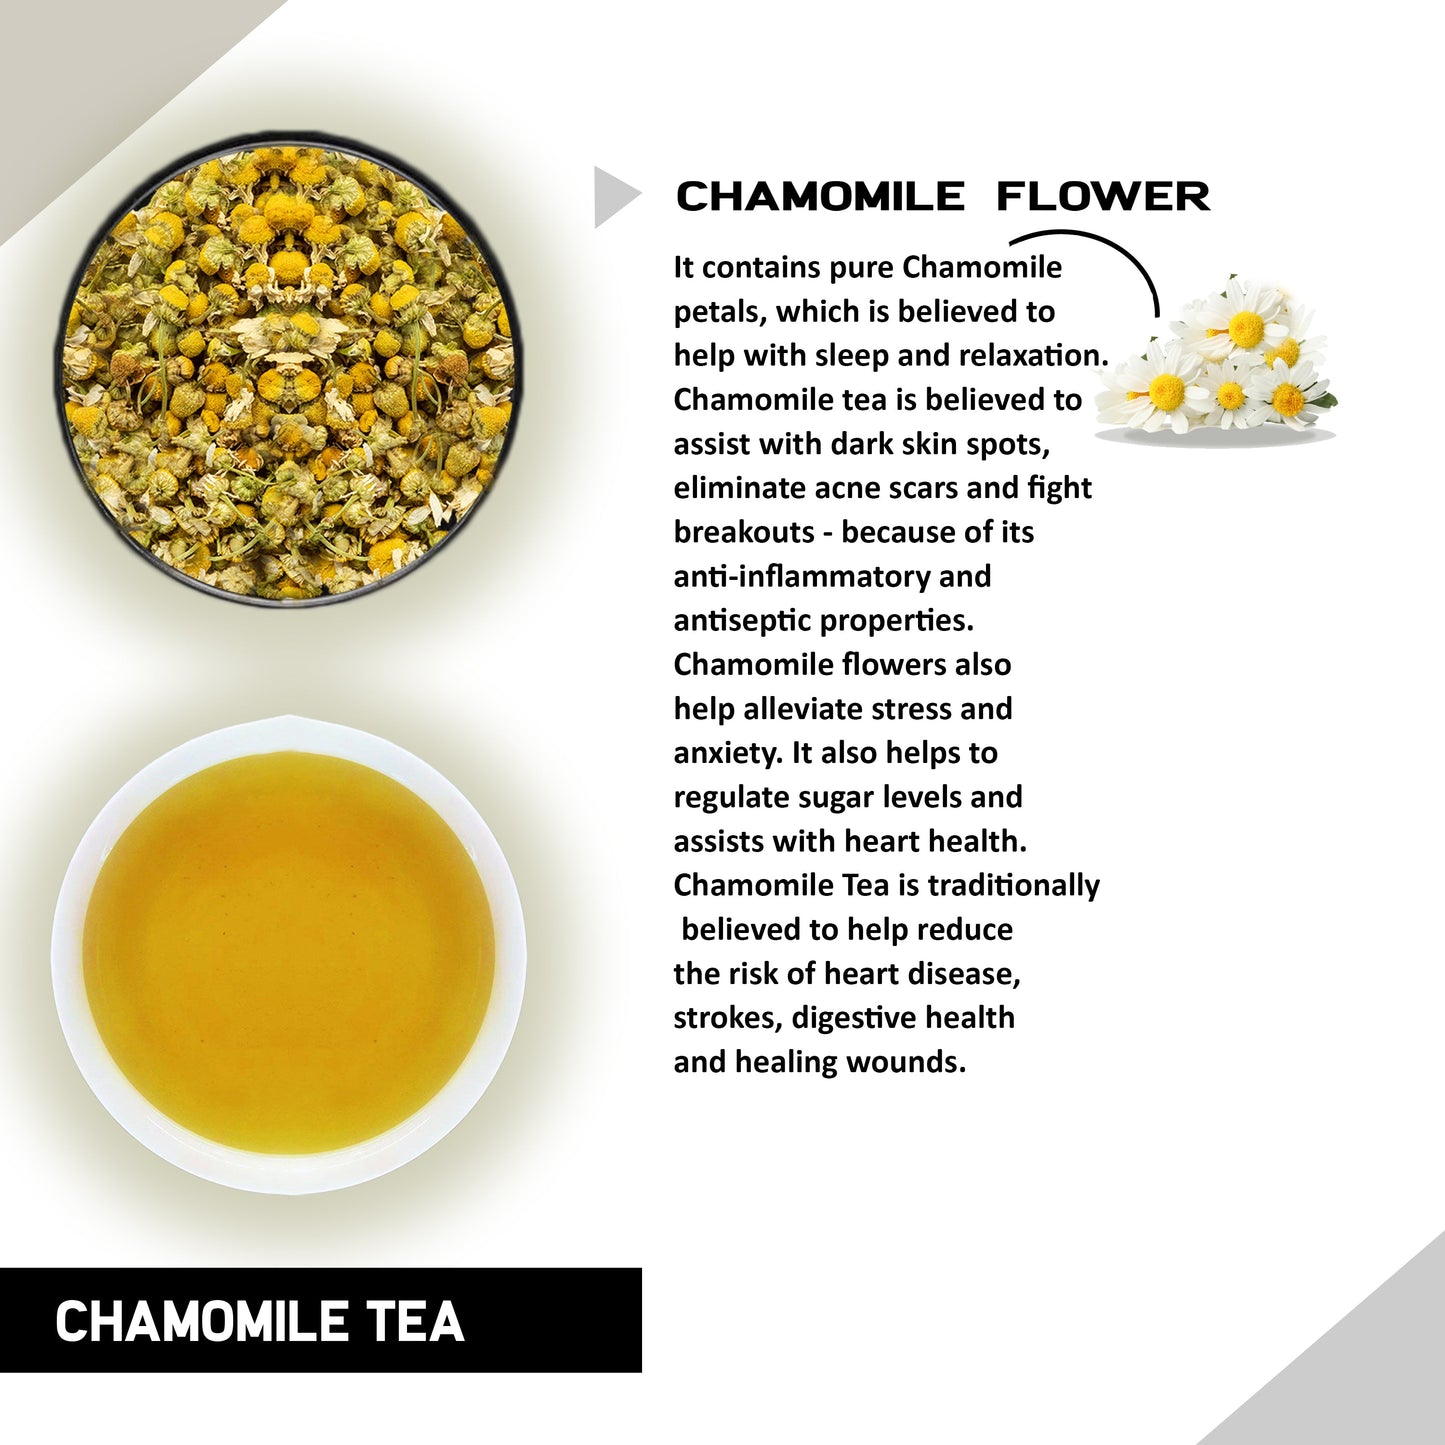 Chamomile Tea (1 Month Pack, 30 Tea Bags) - Helps with Sleep, Sugar Levels and Relaxation